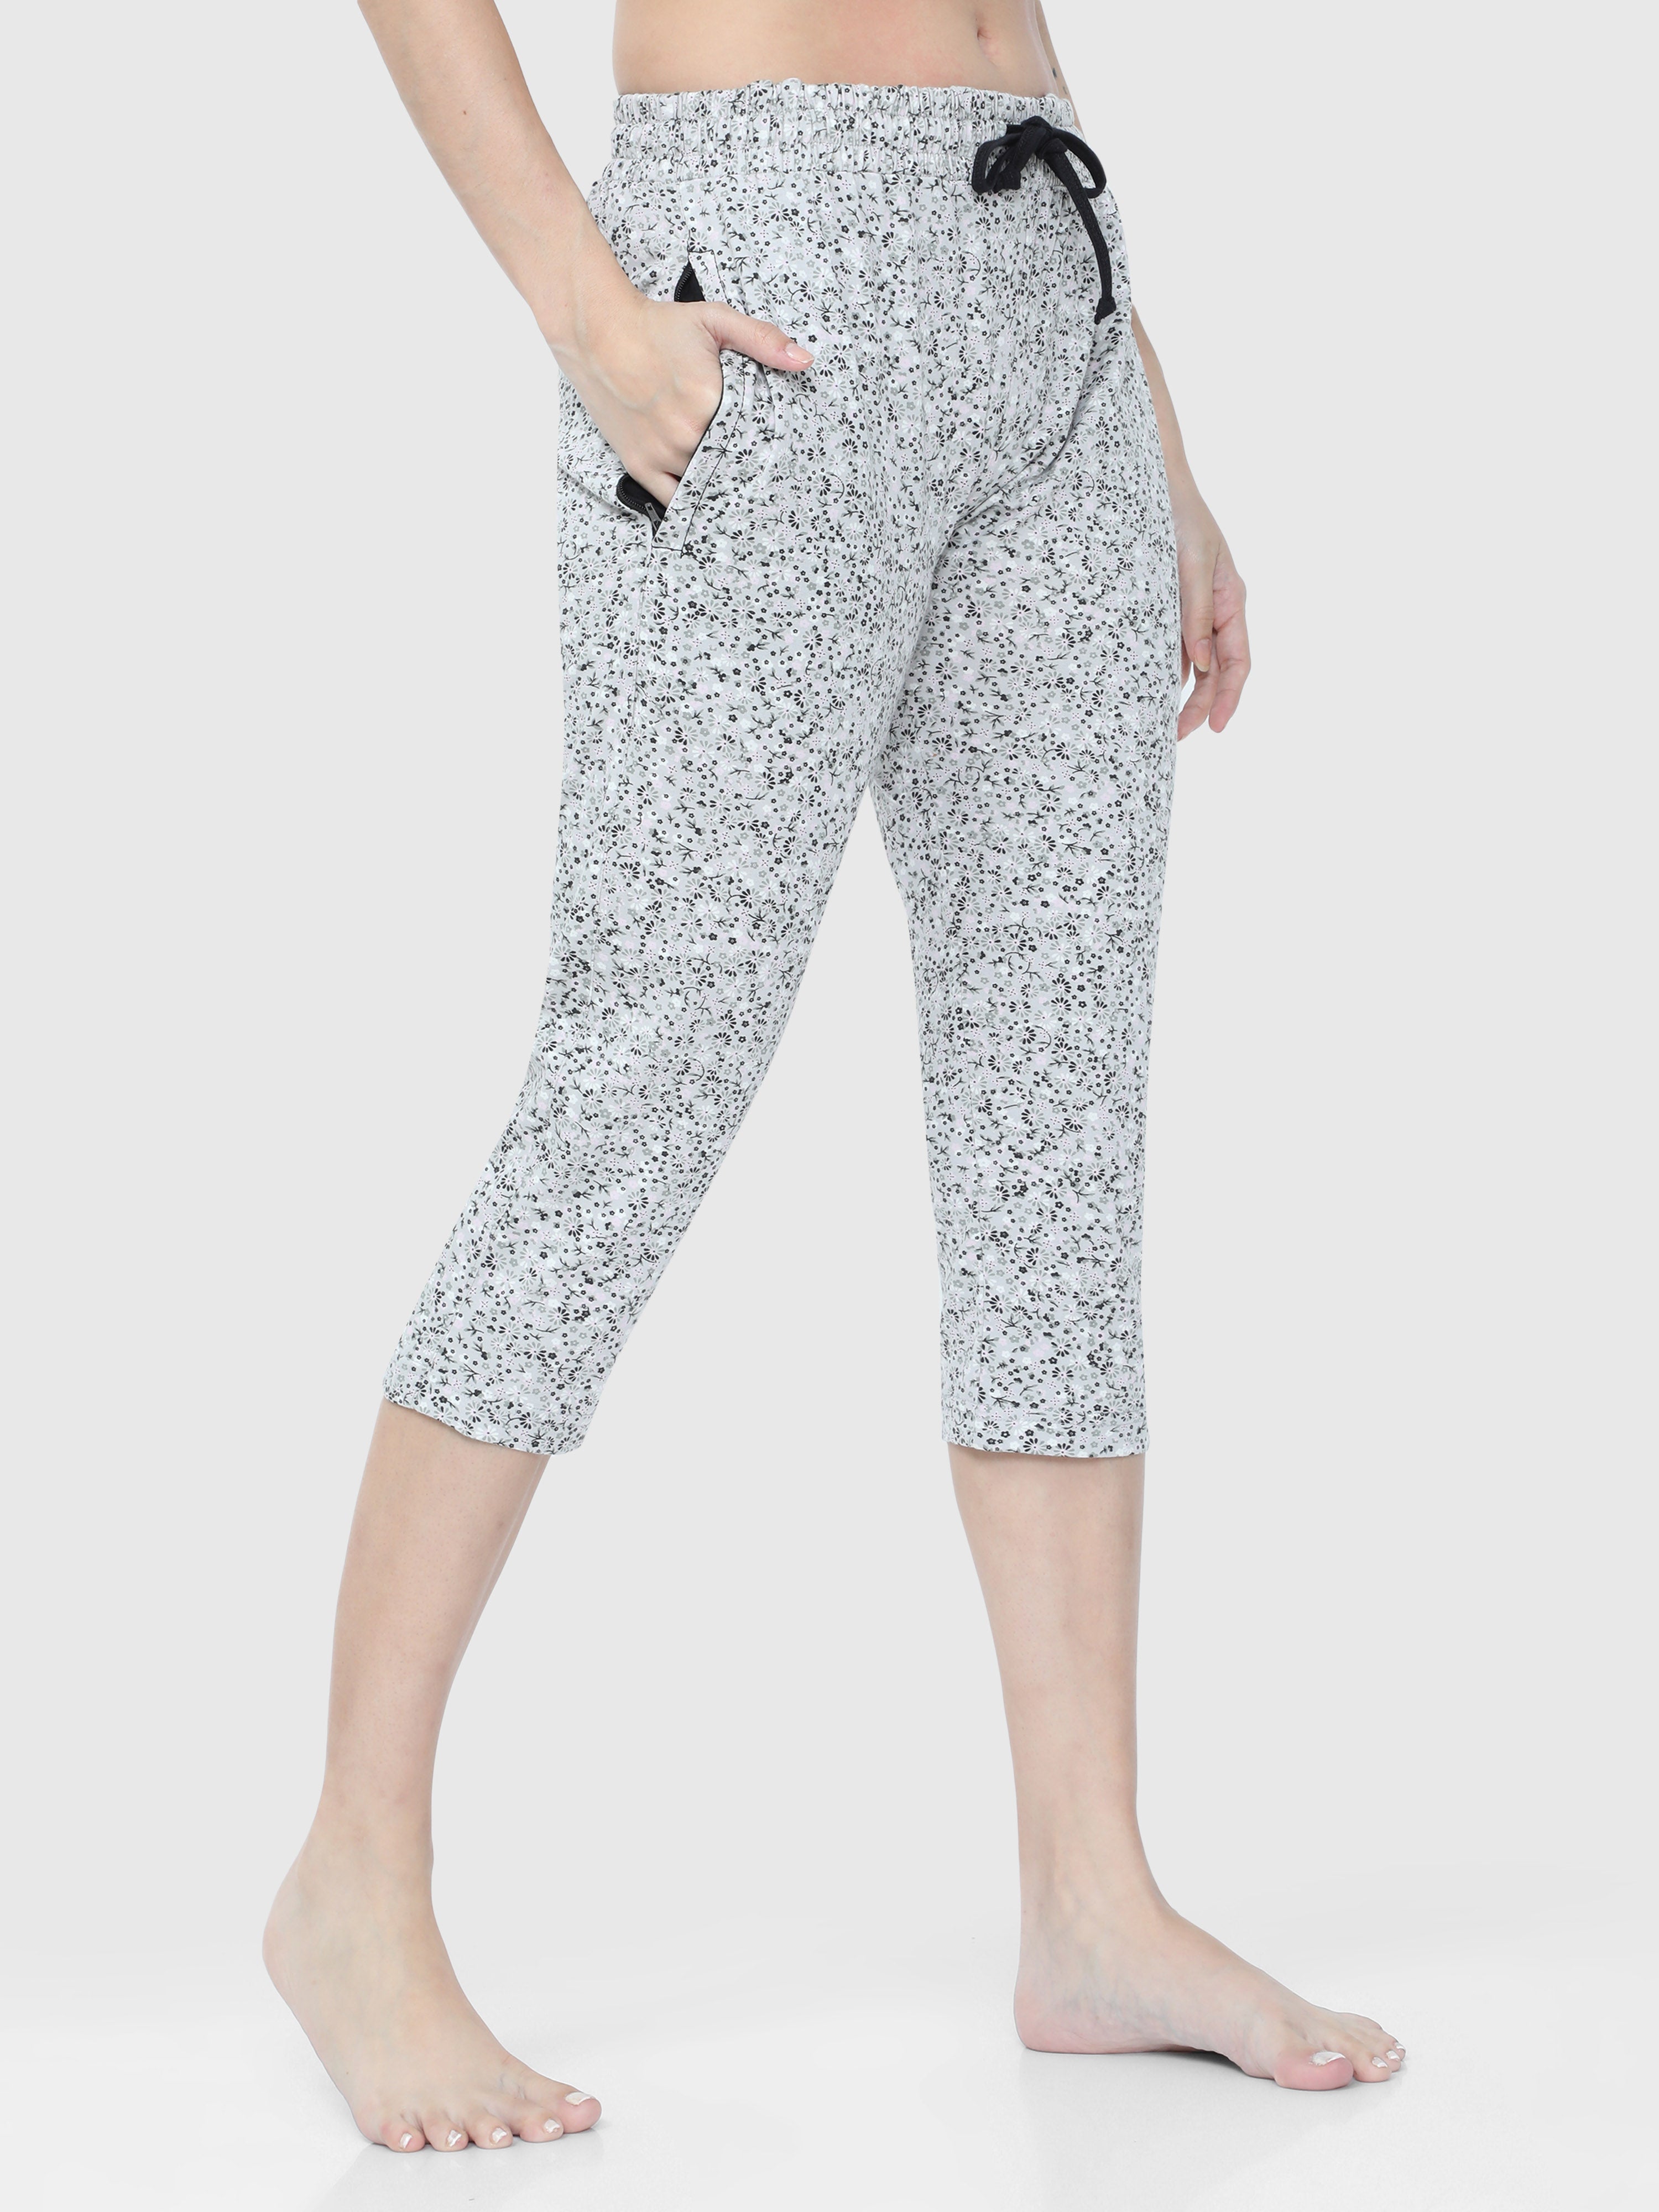 YYDGH Capri Pants for Women Palazzo Lounge Pants Wide Leg Printed Cropped  Bottoms Baggy Trousers Sweatpants with Pockets White Glod S - Walmart.com